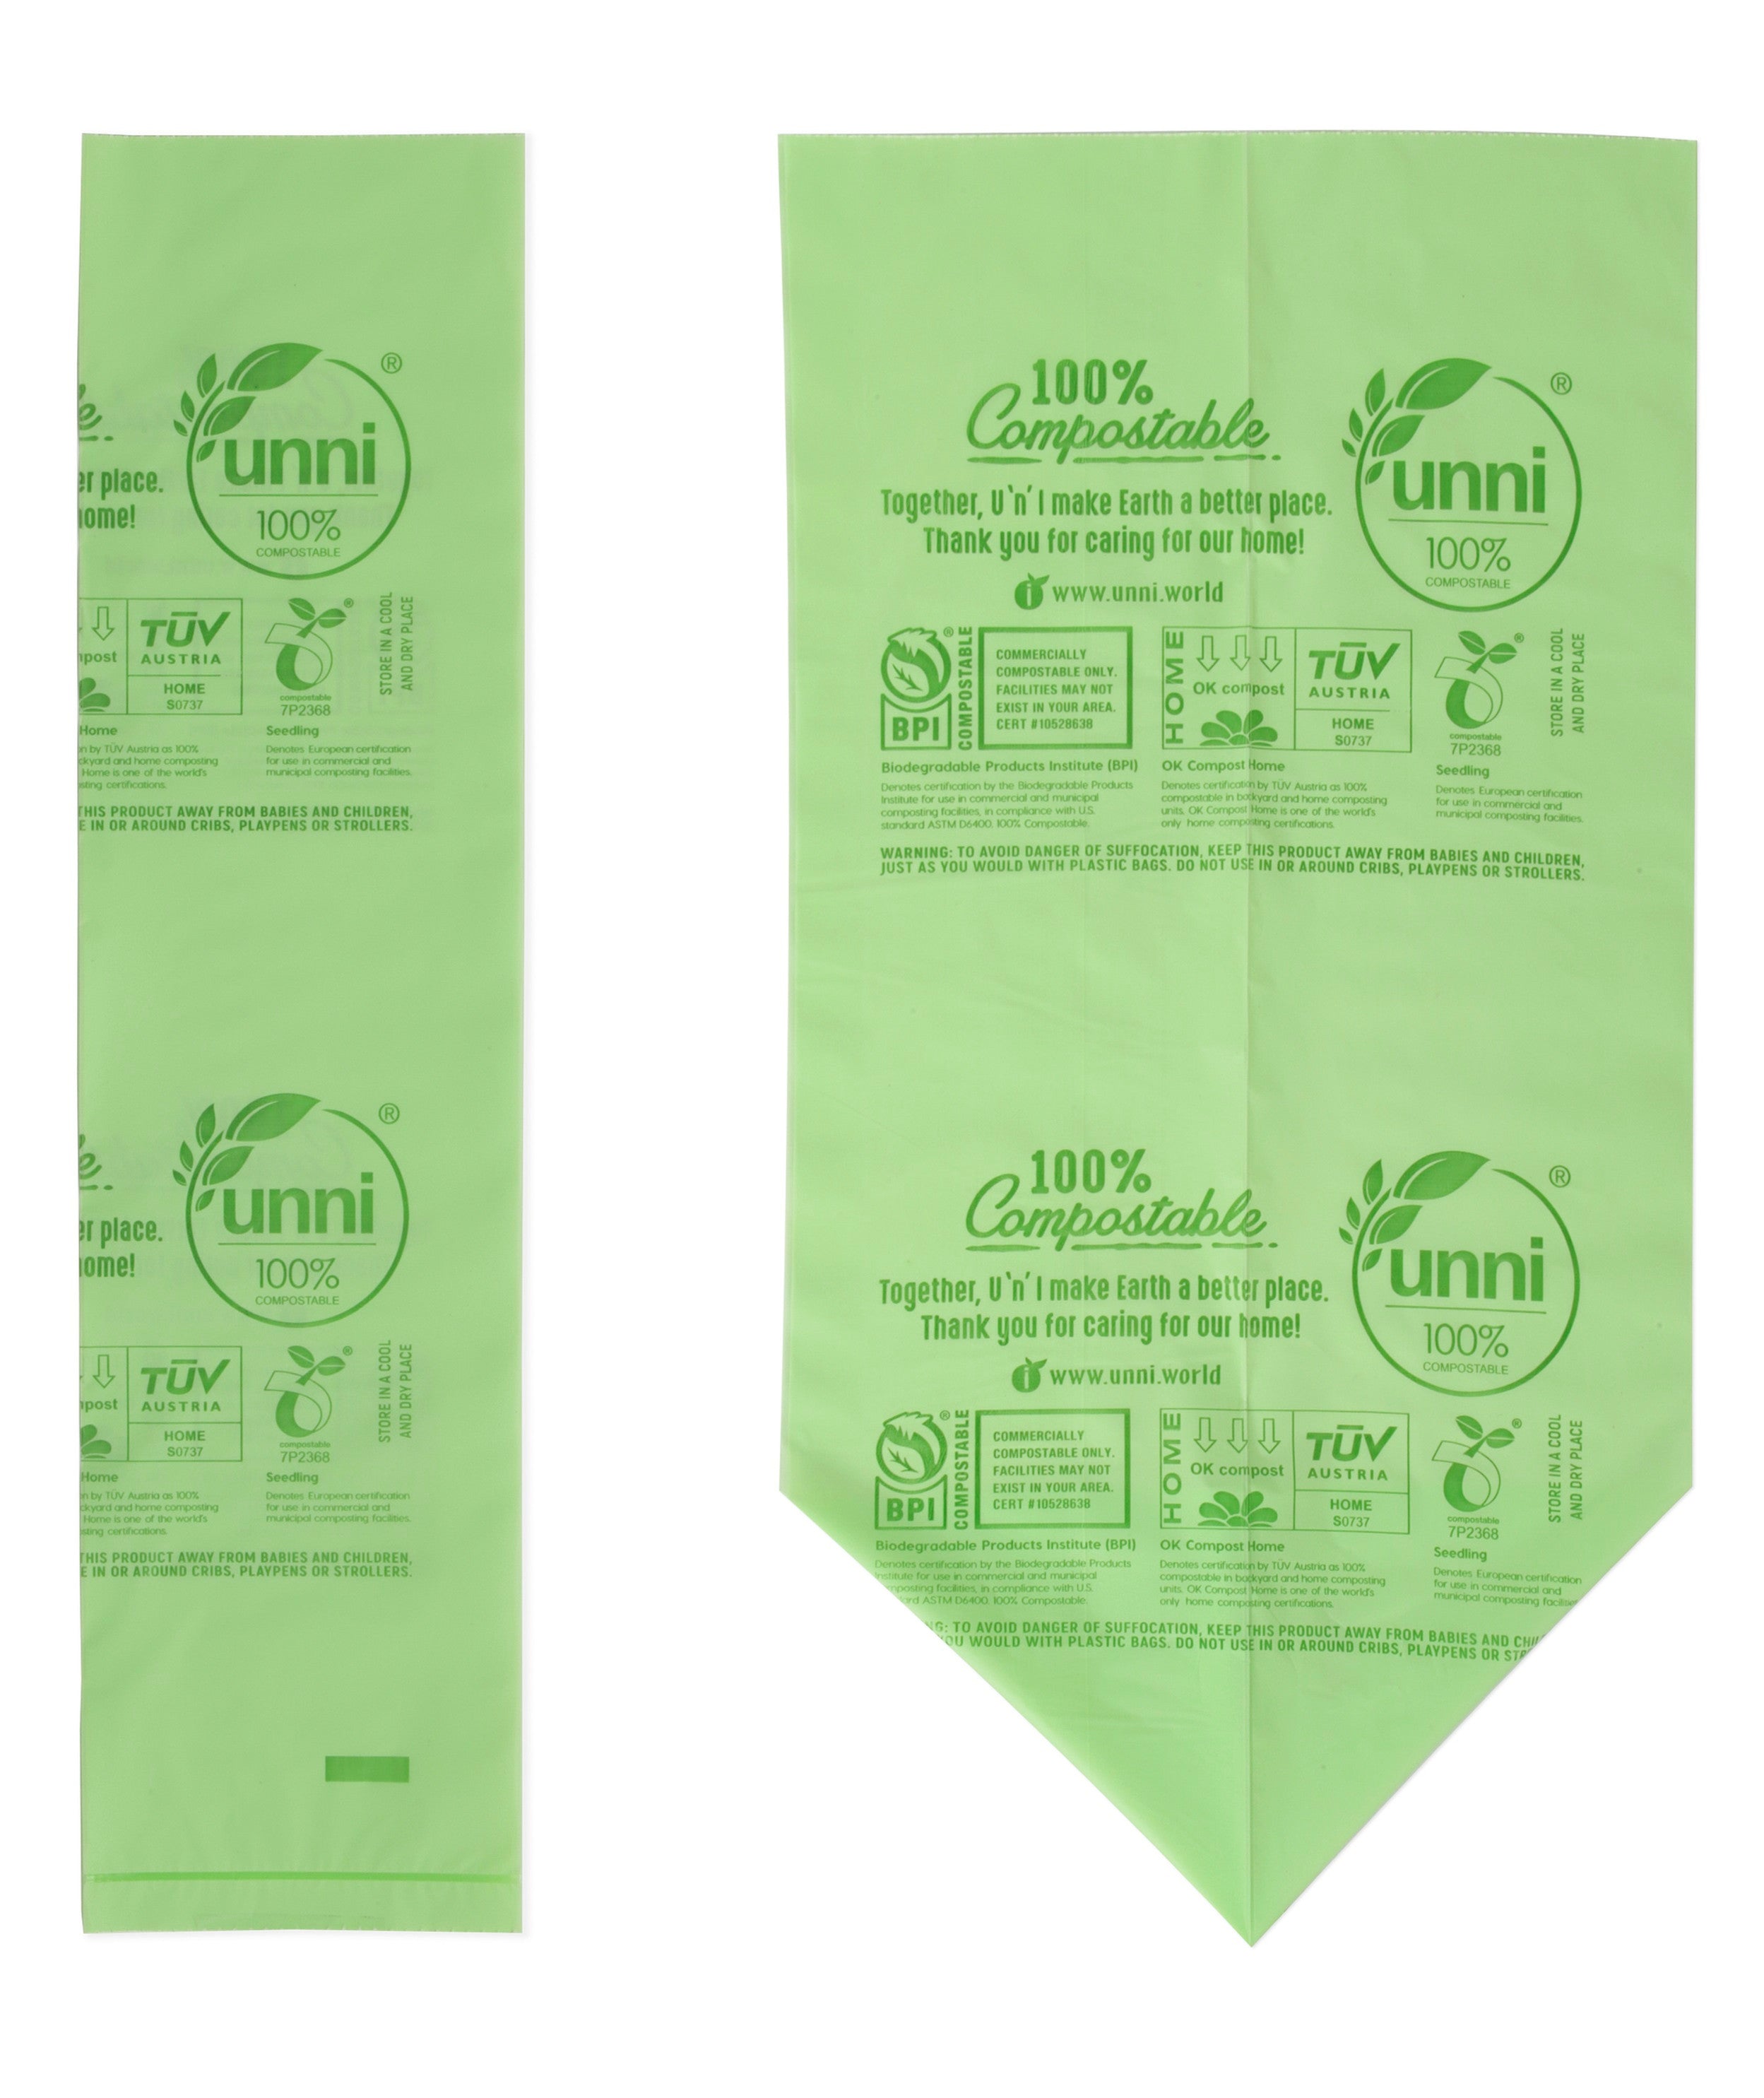 55 Gallon Compostable Large Bags